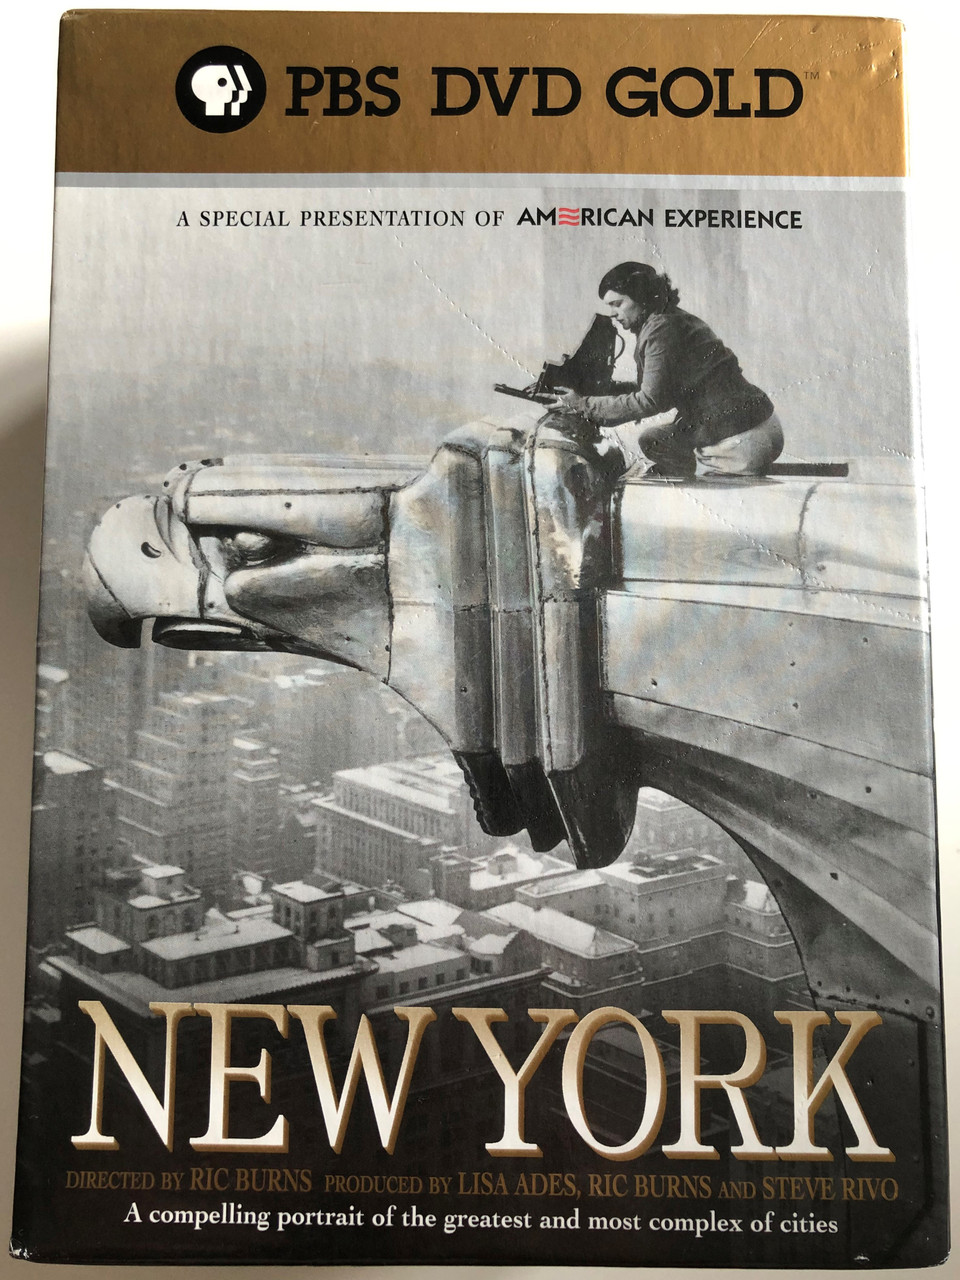 New York Documentary DVD Box 1999 / Directed by Ric Burns / Produced by  Lisa Ades, Ric Burns and Steve Rivo / PBS DVD Gold / 7 DVD SET - 7  documentary